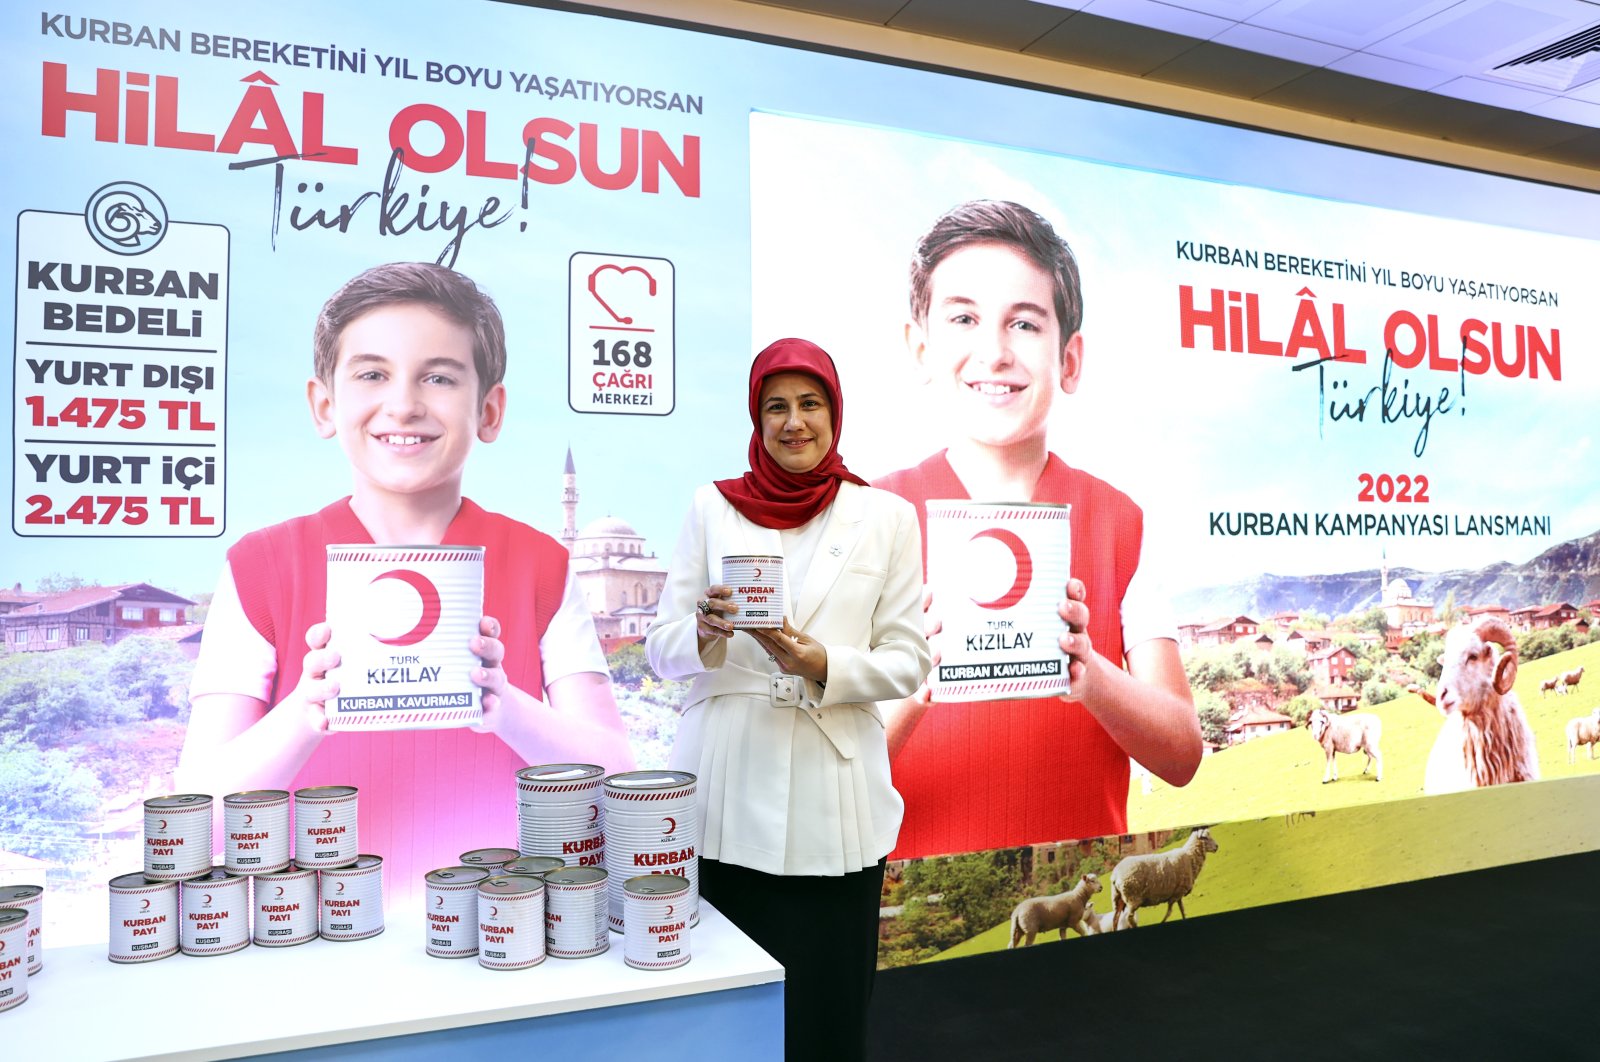 Turkish Red Crescent Deputy Director, Professor Fatma Meriç Yılmaz, shows the cans of meat that will be delivered in the campaign, in Istanbul, Turkey, June 9, 2022.